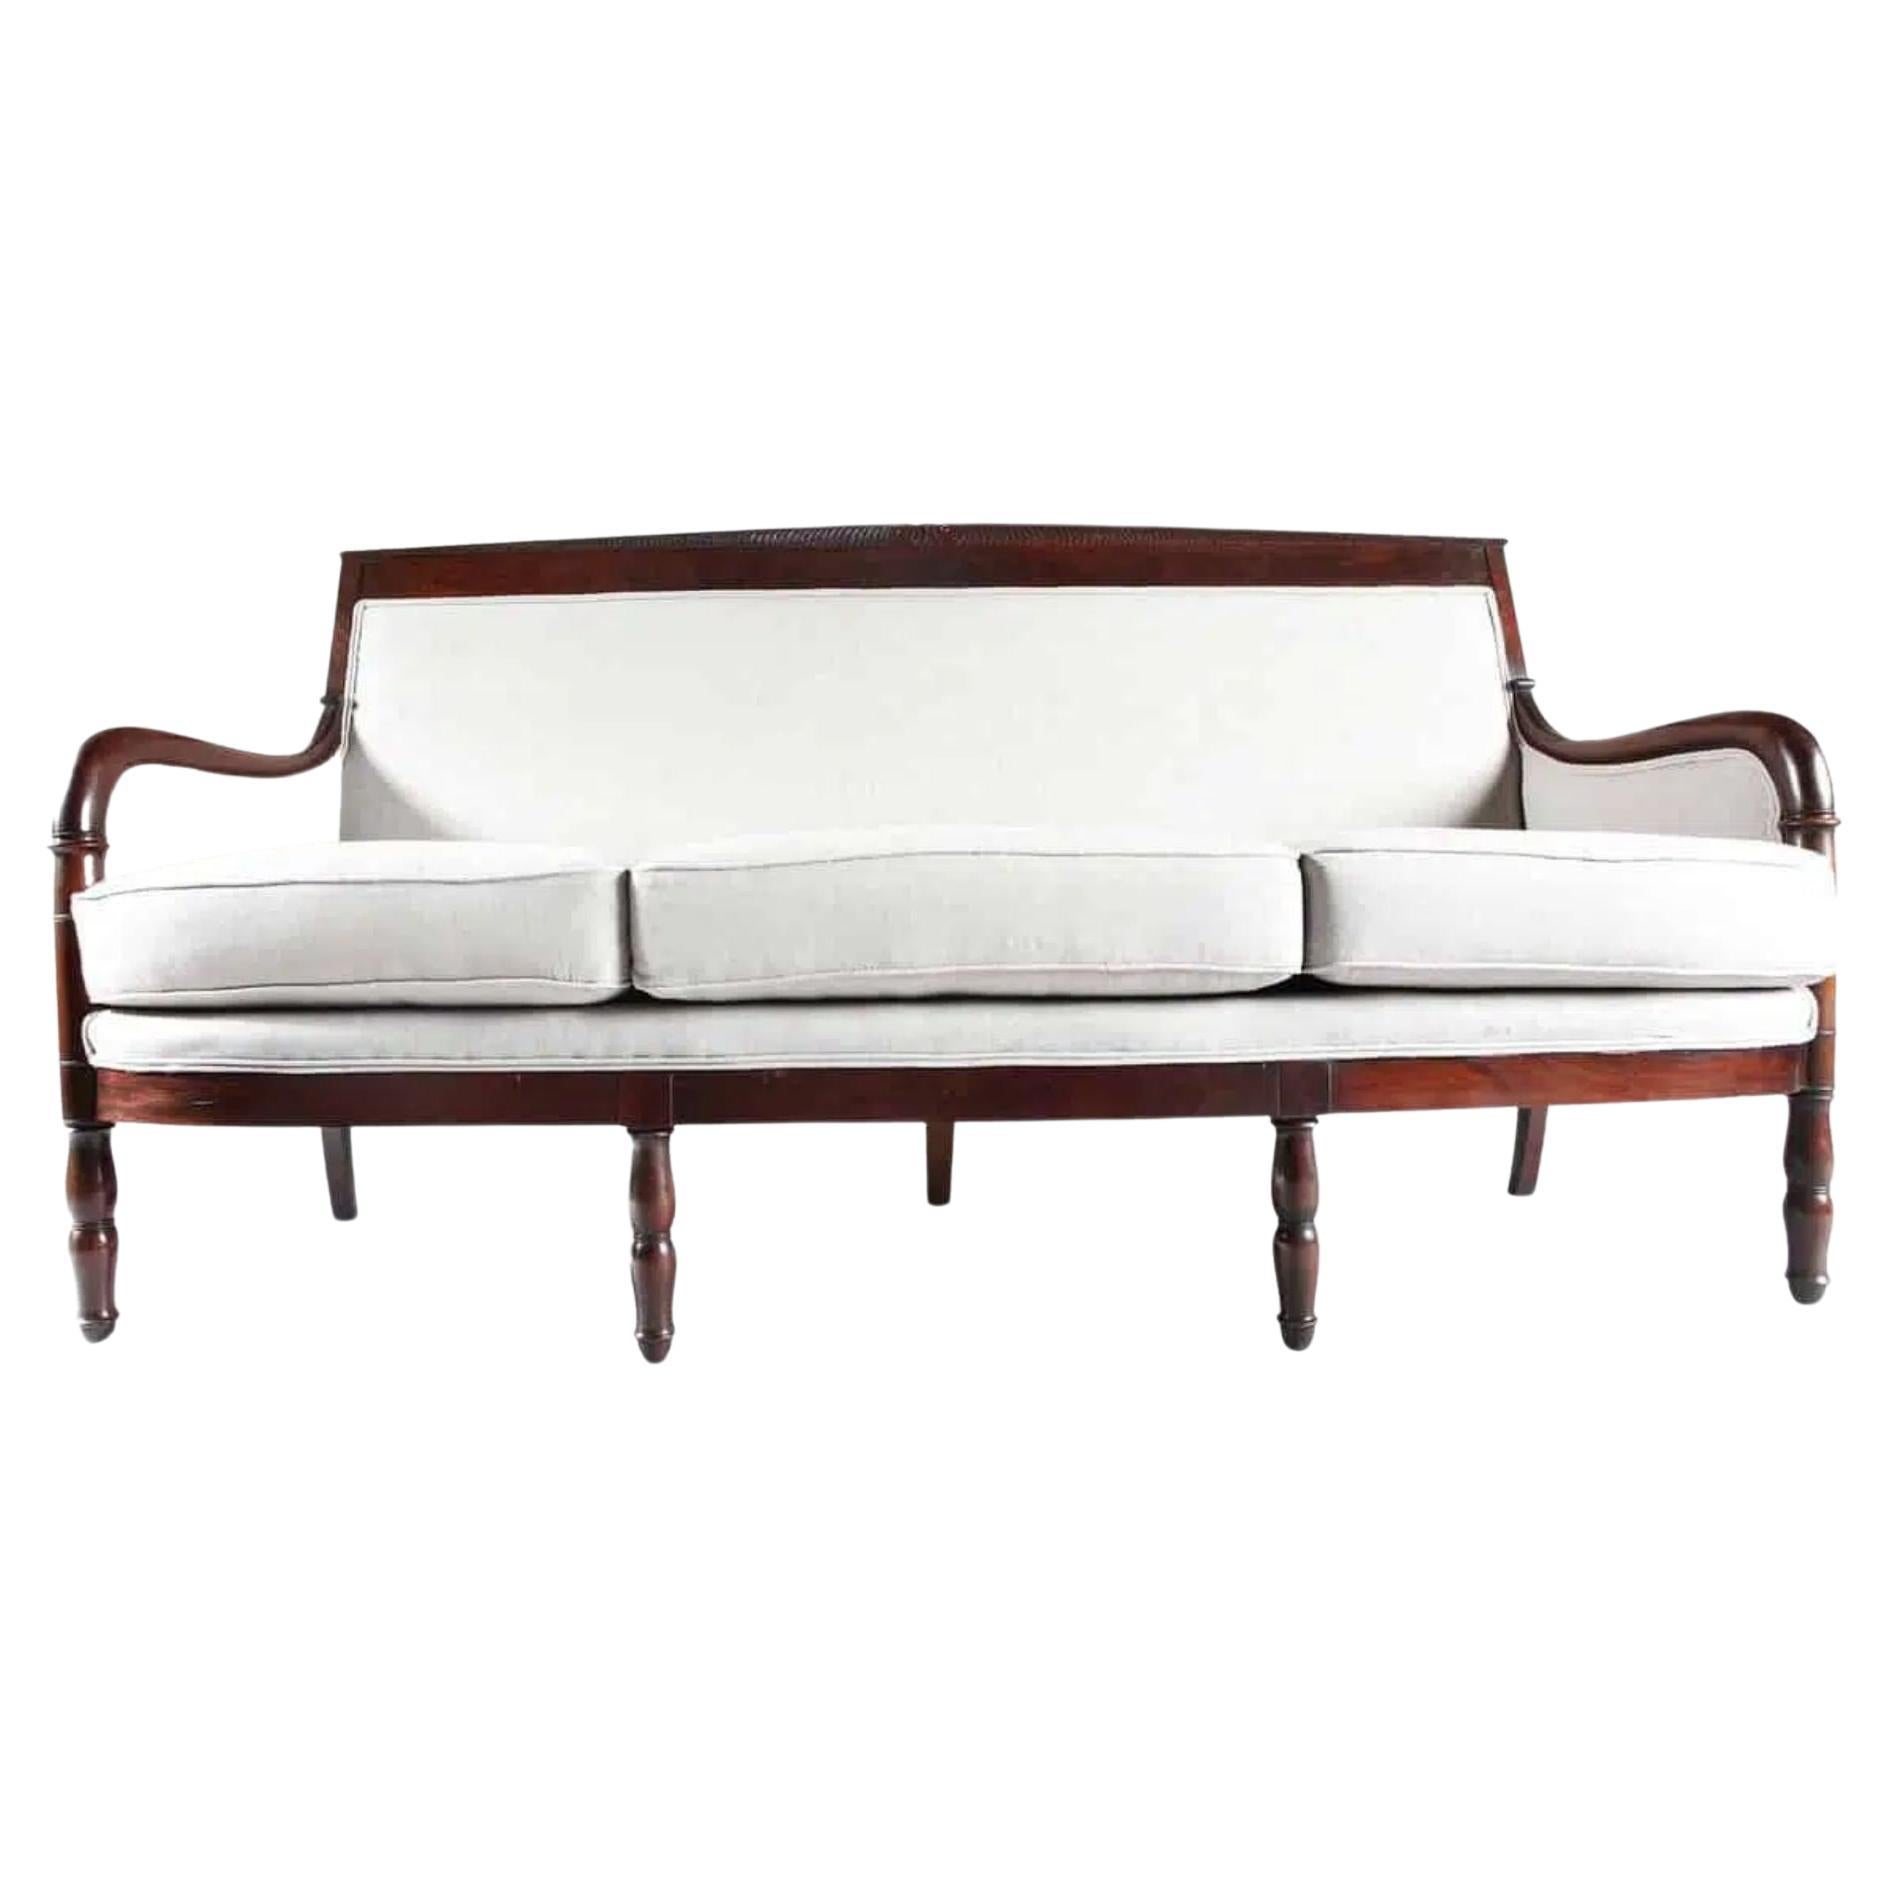 French Empire Mahogany Settee, Early 19th Century For Sale